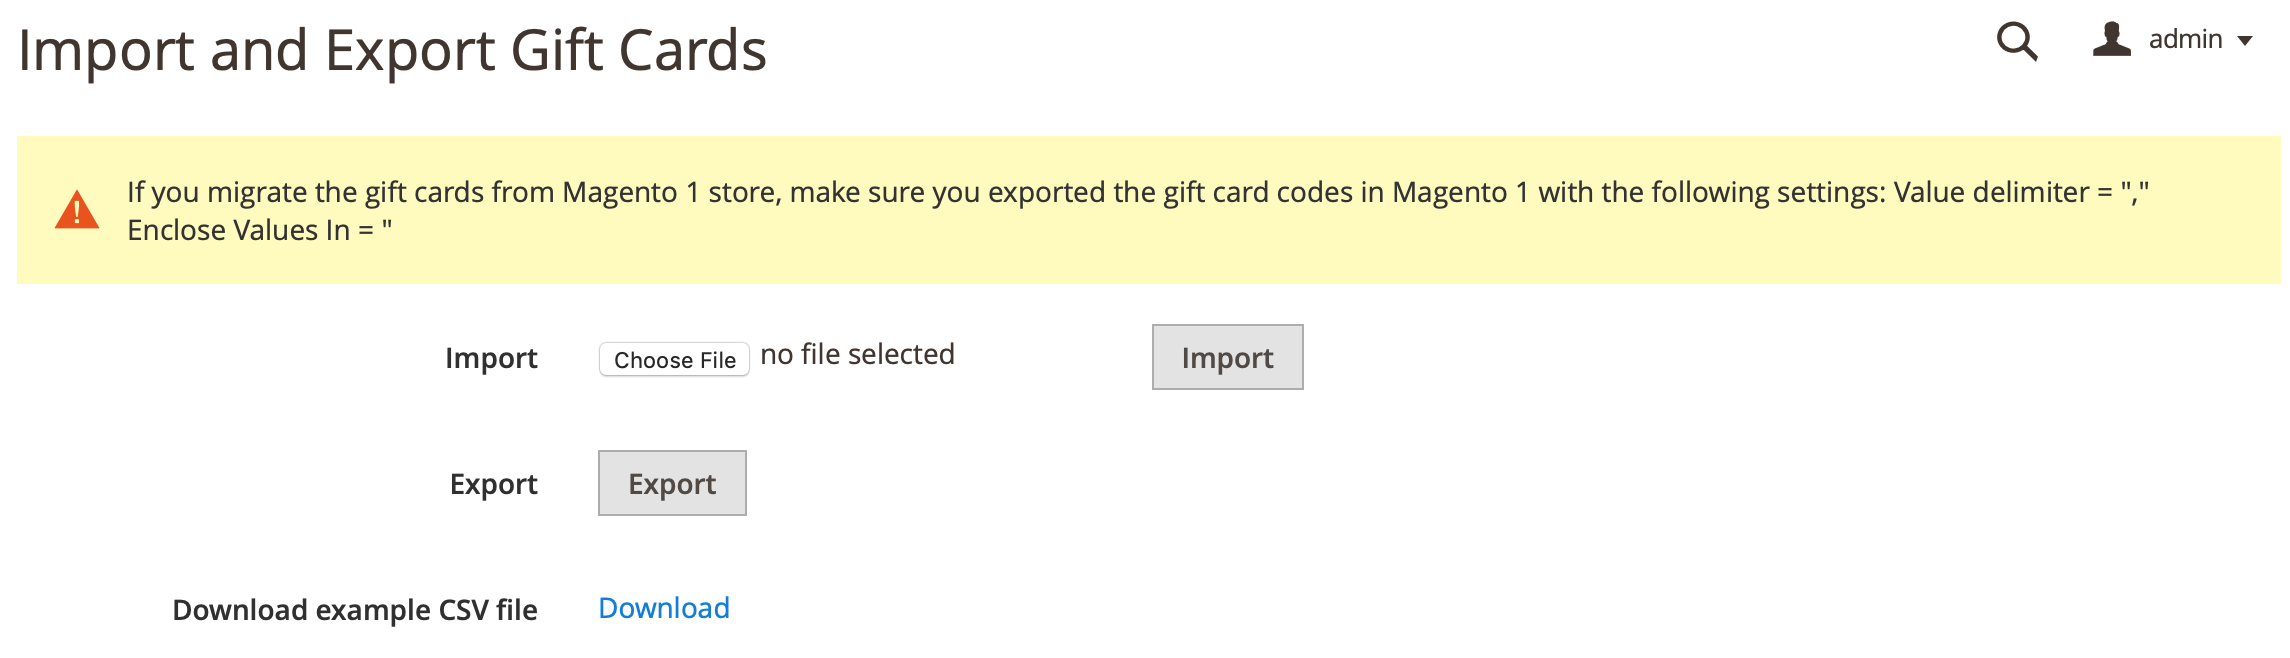 Mageworx Gift Card Codes Import/Export